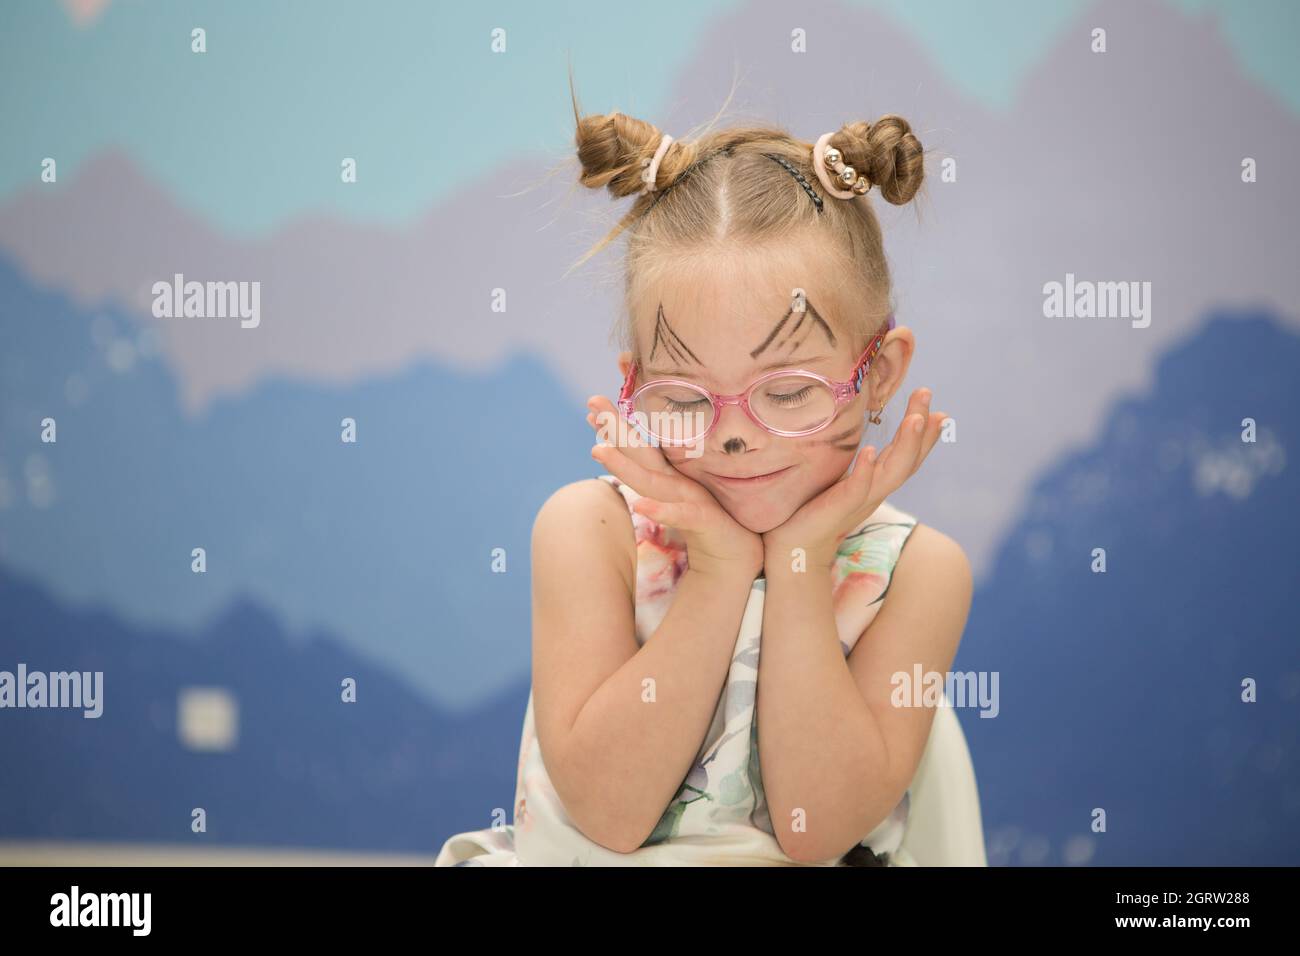 Beautiful girl with Down syndrome with aqua makeup for her birthday Stock Photo